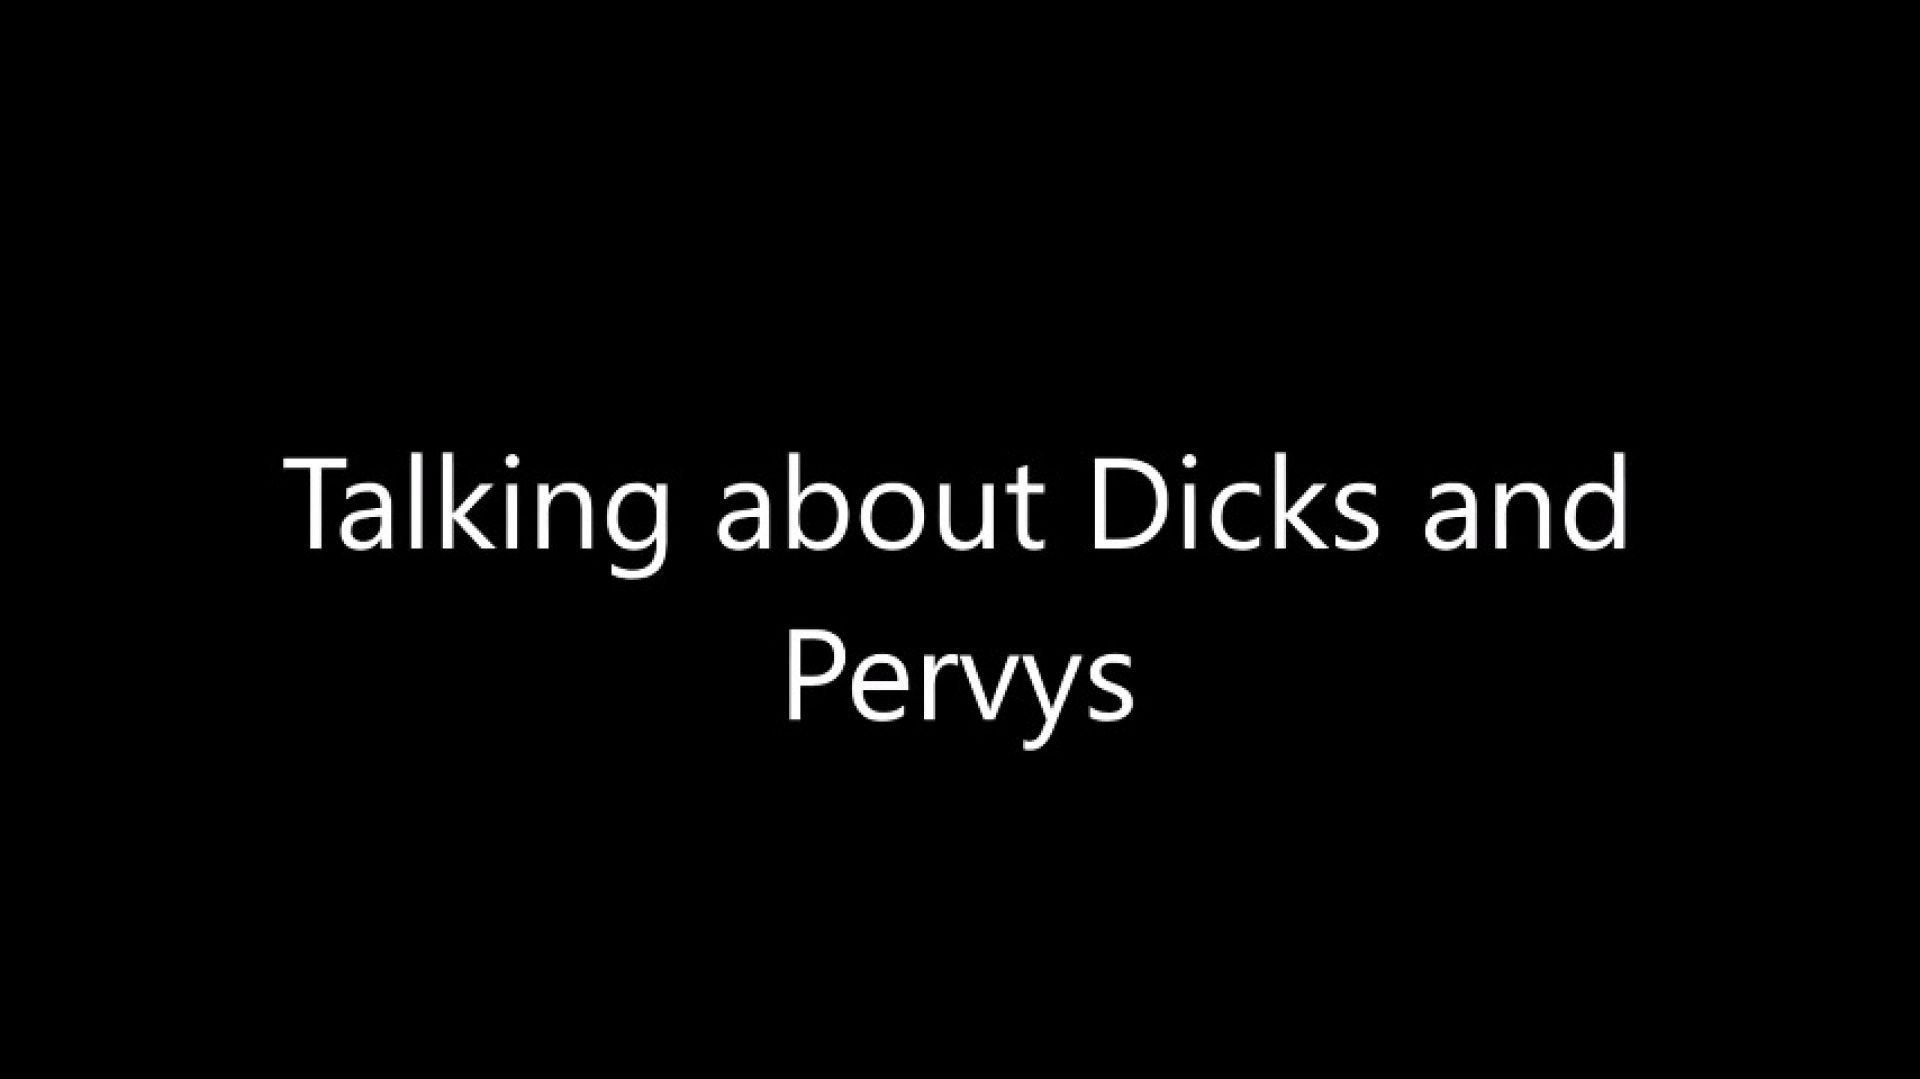 Talking about dicks and pervys